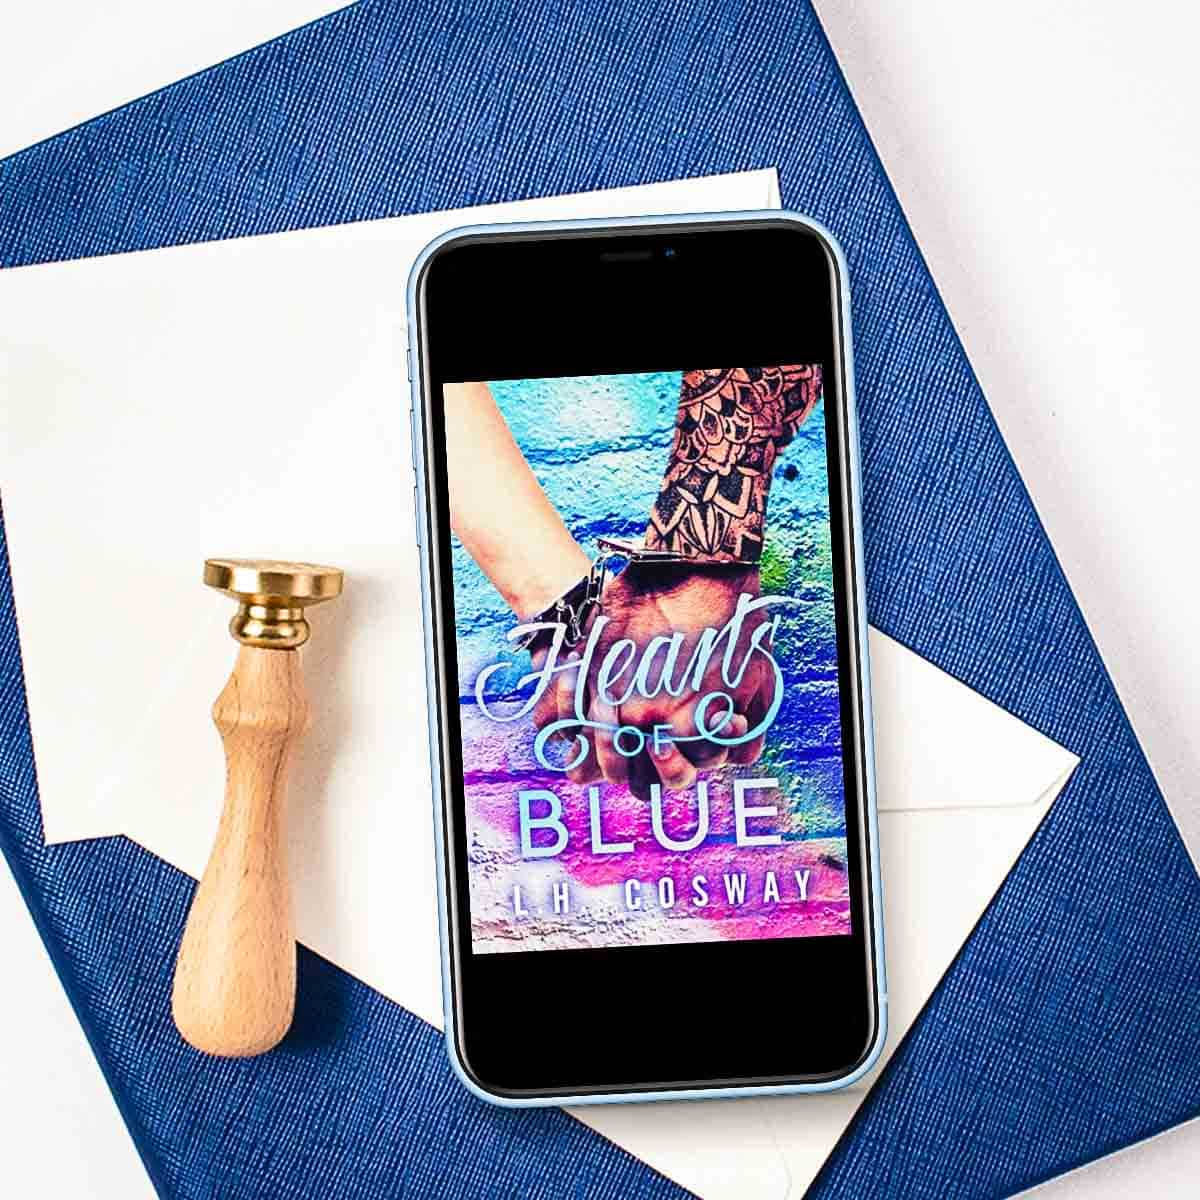 Hearts of Blue by LH Cosway – Hearts Book 4